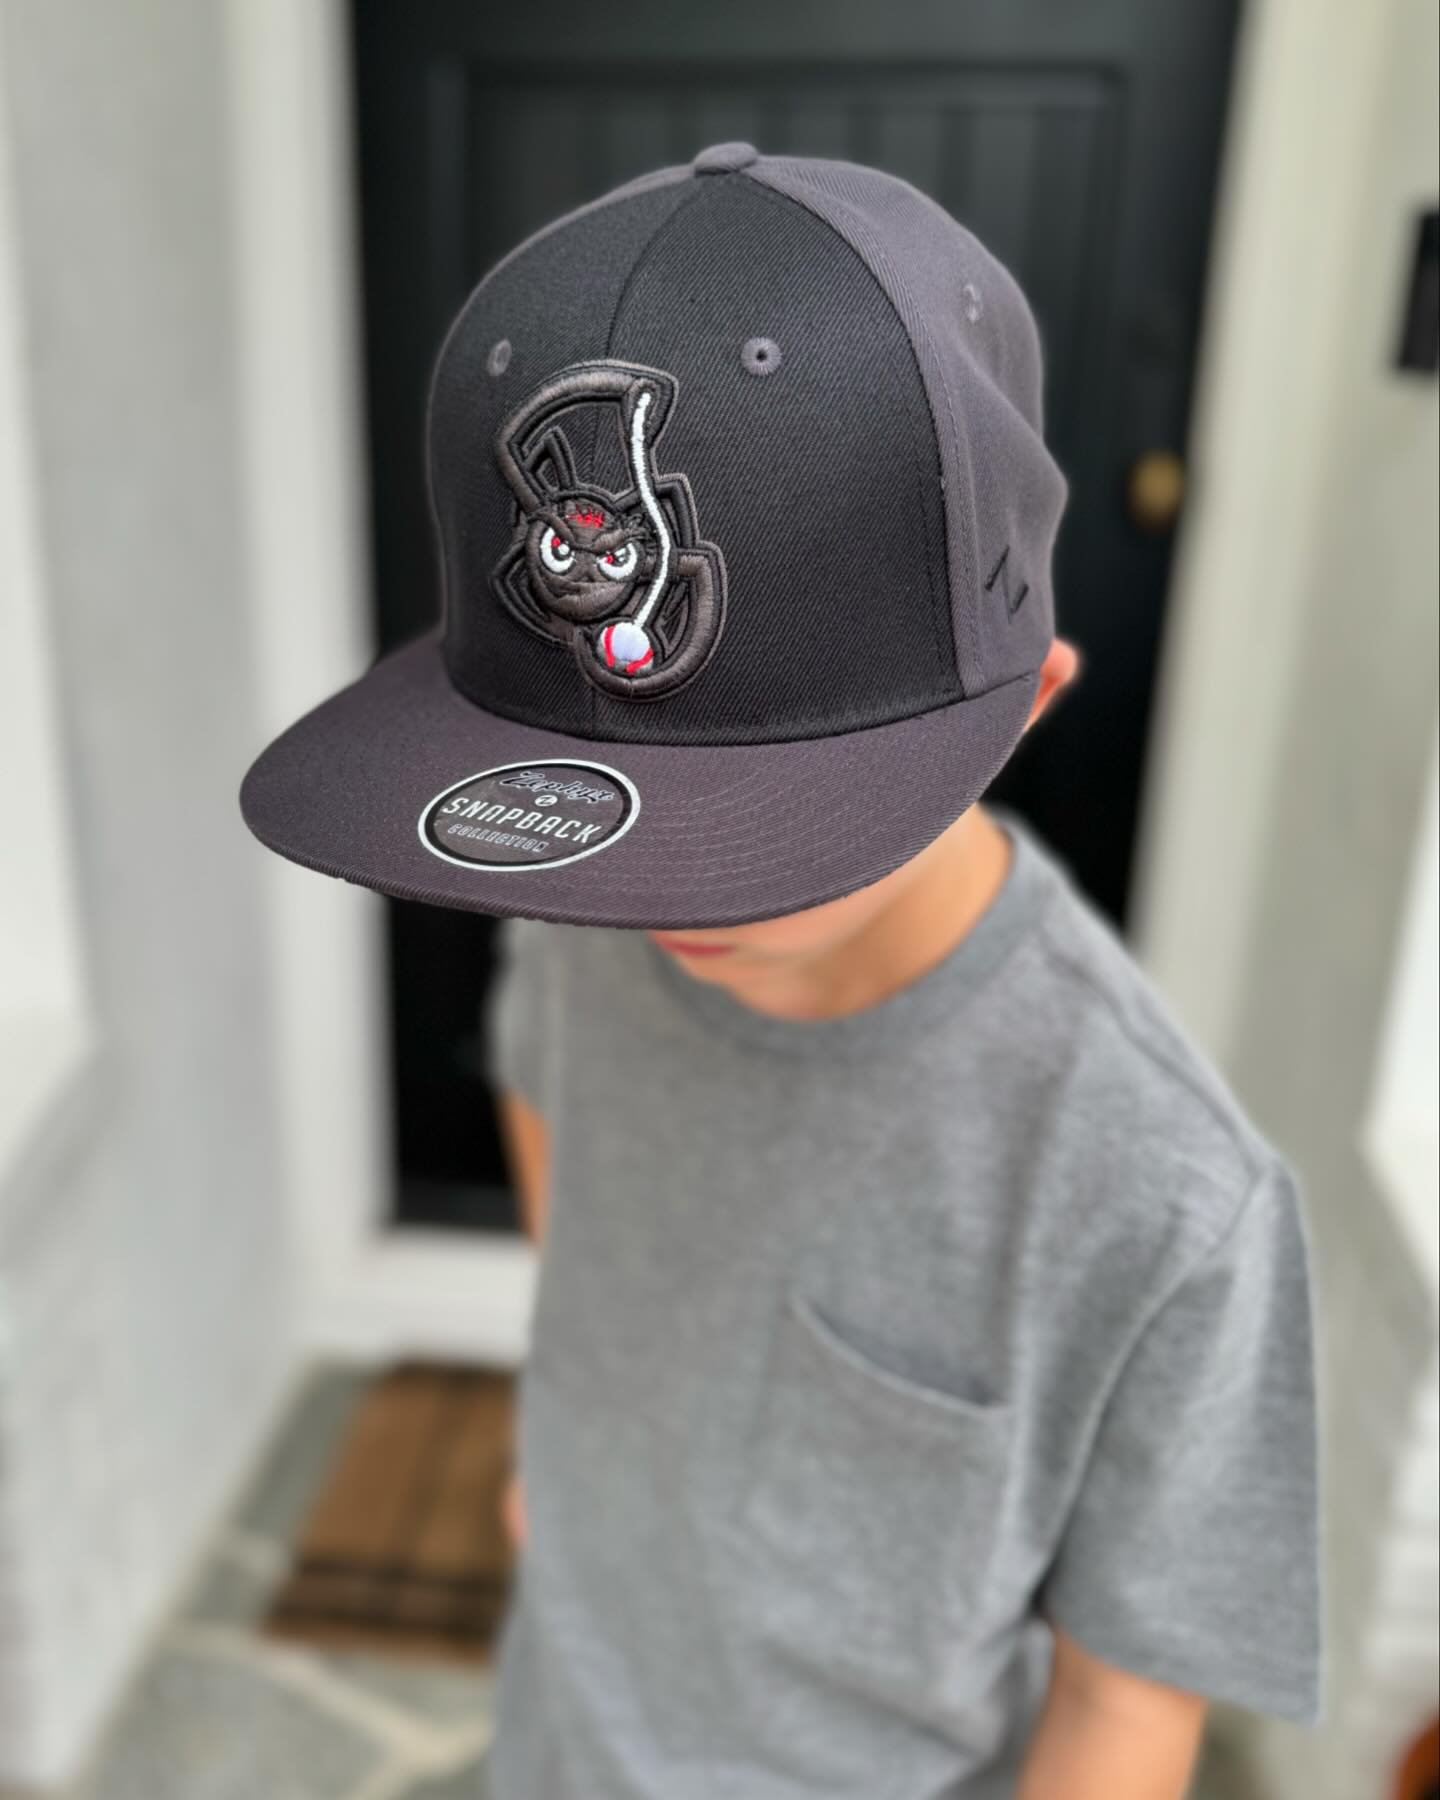 We are pumped about this slight modification to the Black Widow Camp Team Cap! We went with a black face to help set off our little 6 legged baseball spinning arachnid. Who is excited for FCA camp? 🕷️🕸️